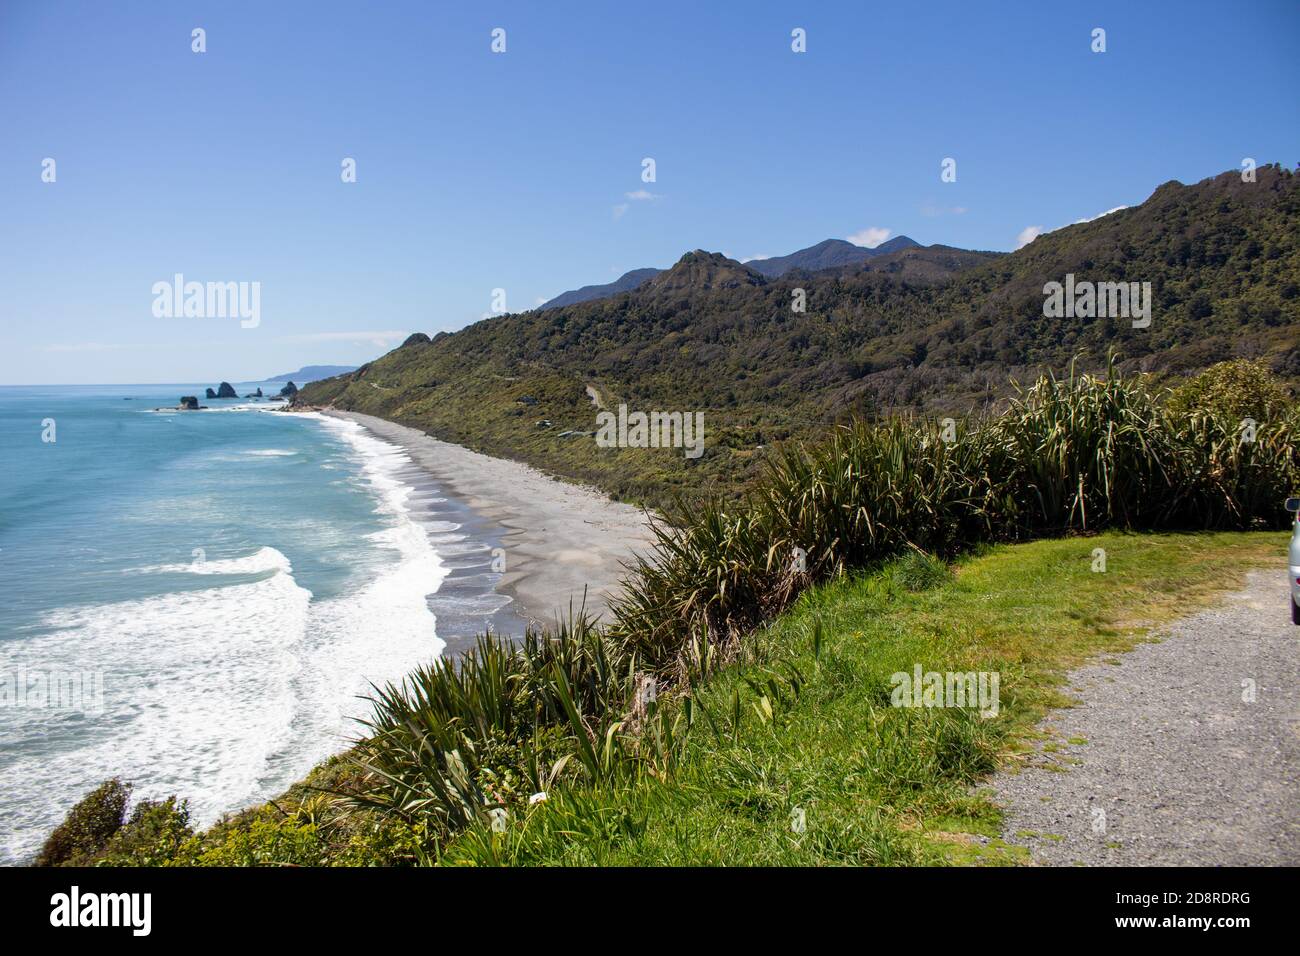 A sea beach in West coast New Zealand surrounded by mountains and green bushes and trees Stock Photo